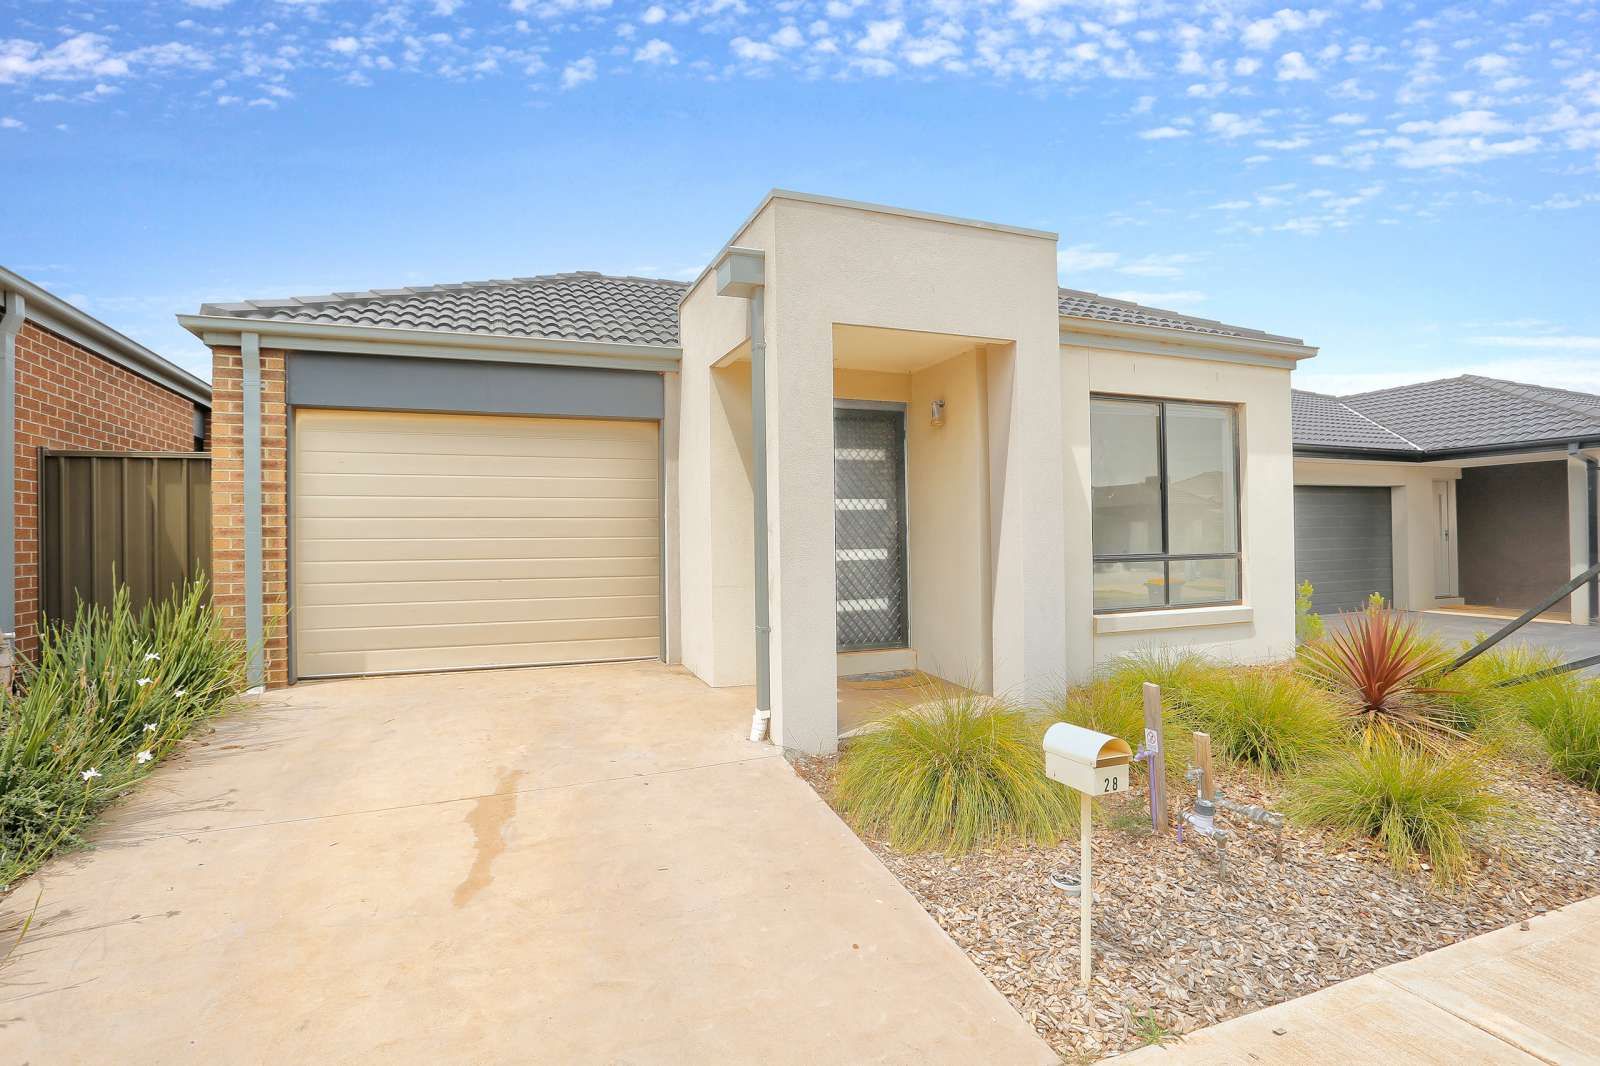 3 bedrooms House in 28 Astley Drive (Lot 156) MELTON SOUTH VIC, 3338